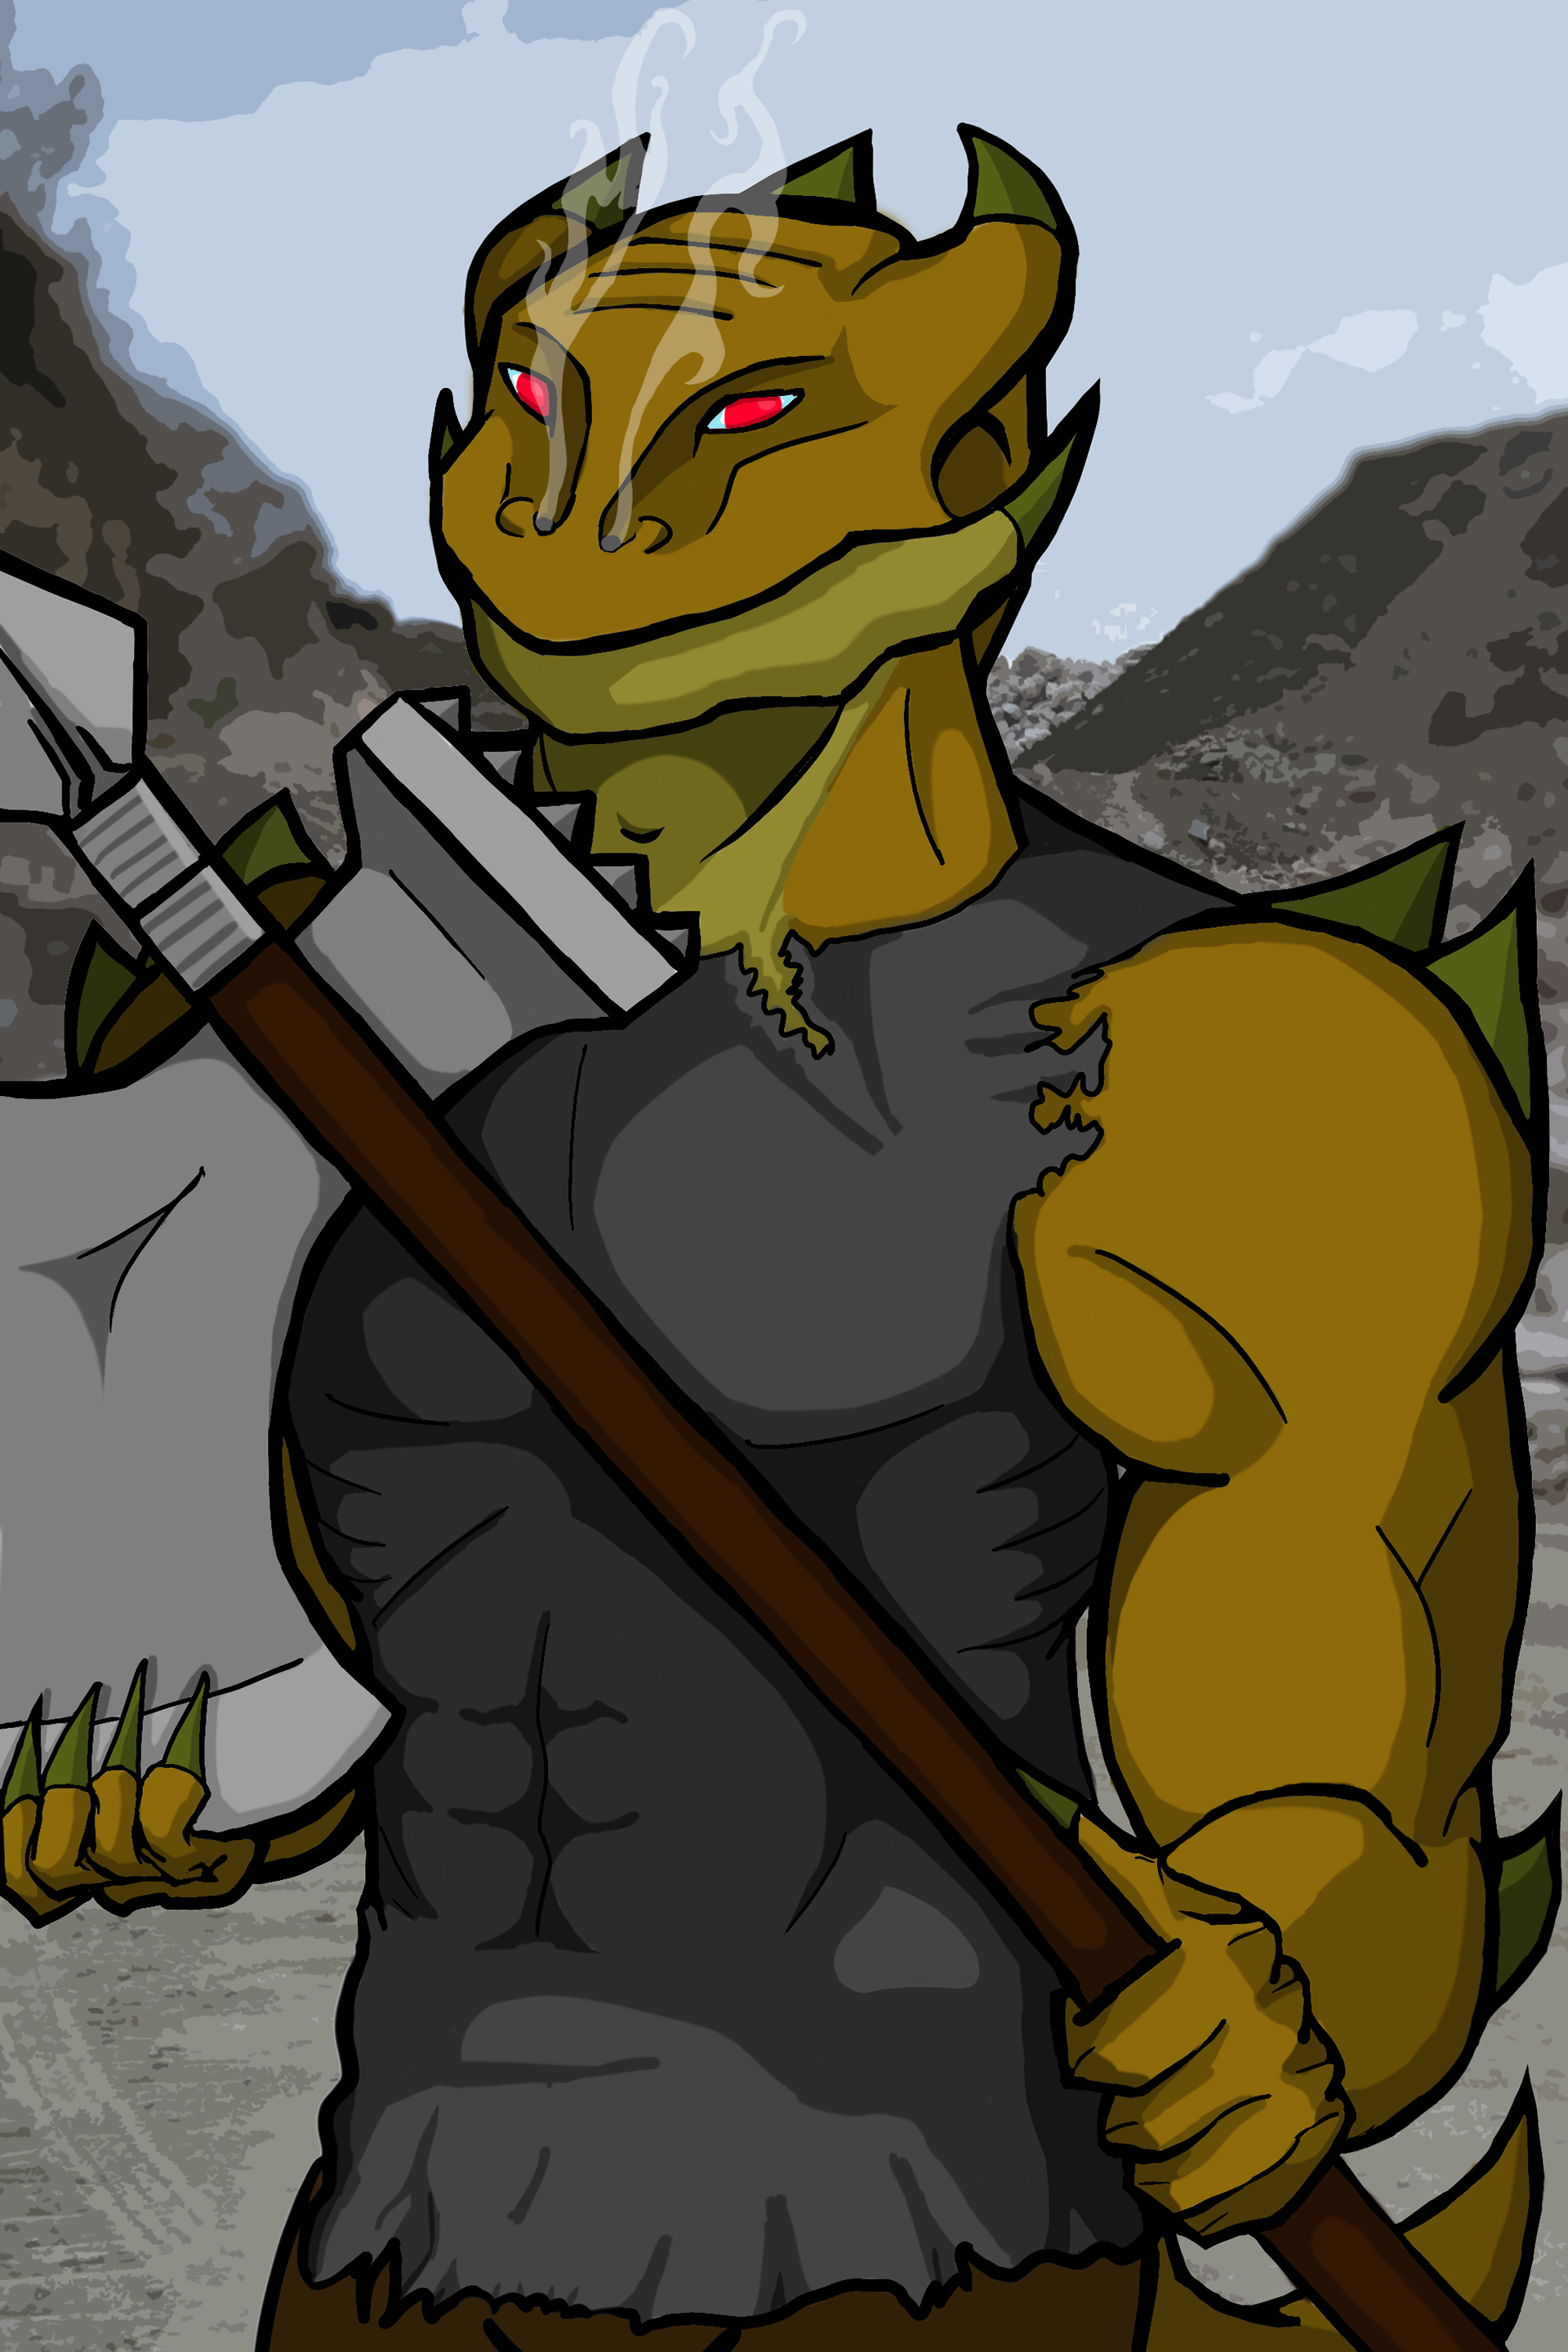 I drew this for a friend who made a D&D character by the name of Lucky the Lizard - an unfortunate Dragonborn Barbarian. Sadly, like most D&D stories, this campaign was so short-lived as to never happen.